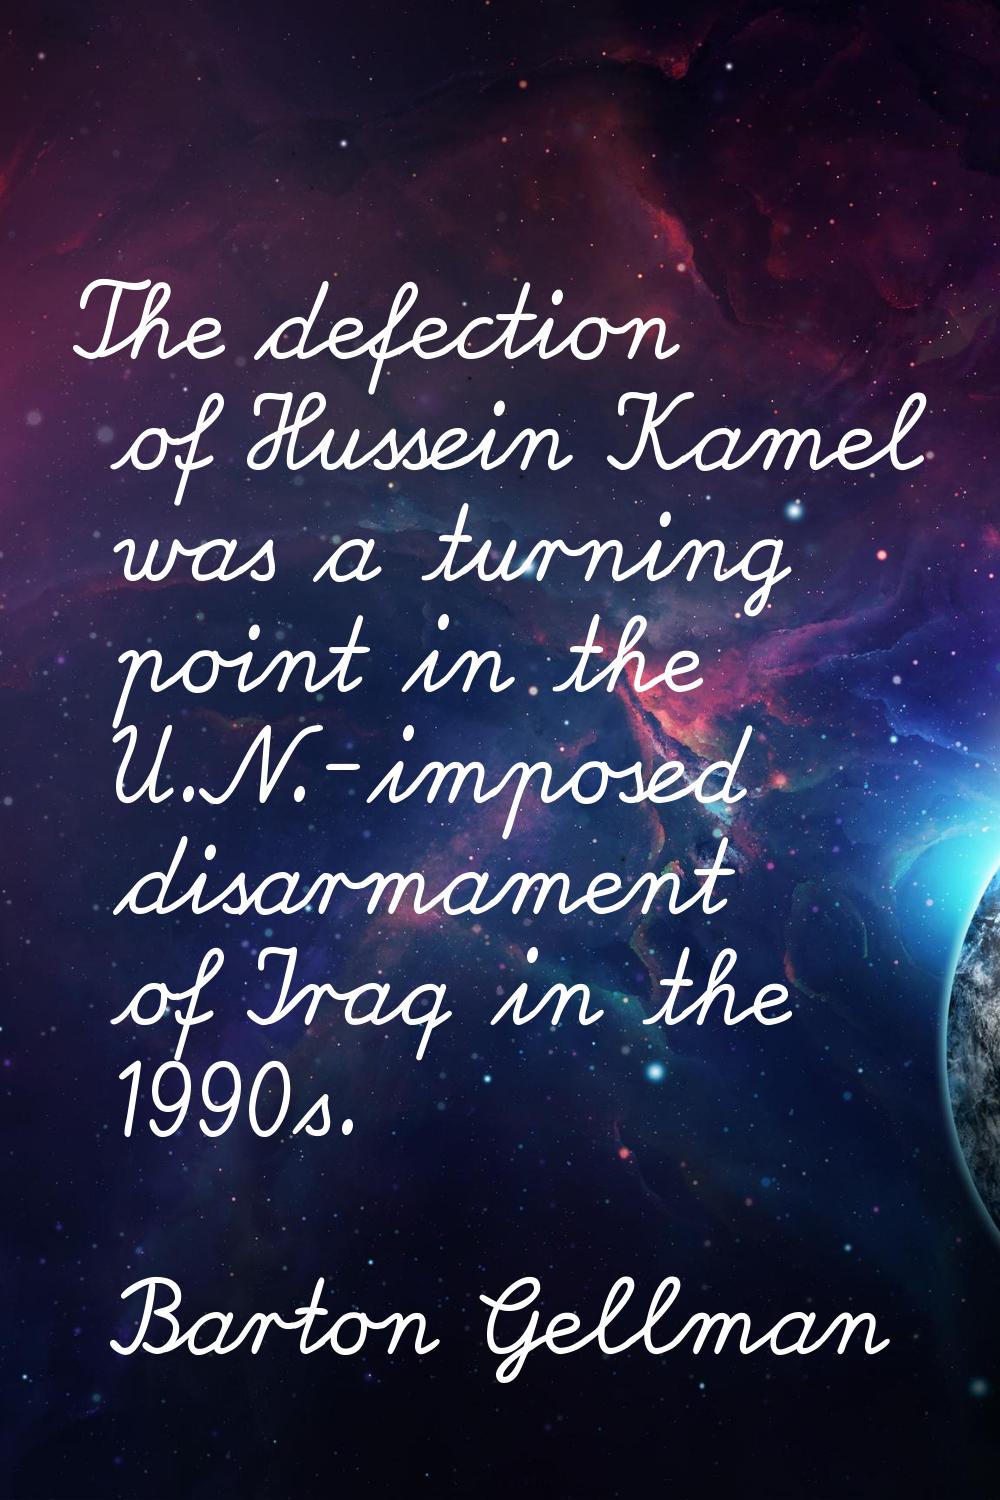 The defection of Hussein Kamel was a turning point in the U.N.-imposed disarmament of Iraq in the 1